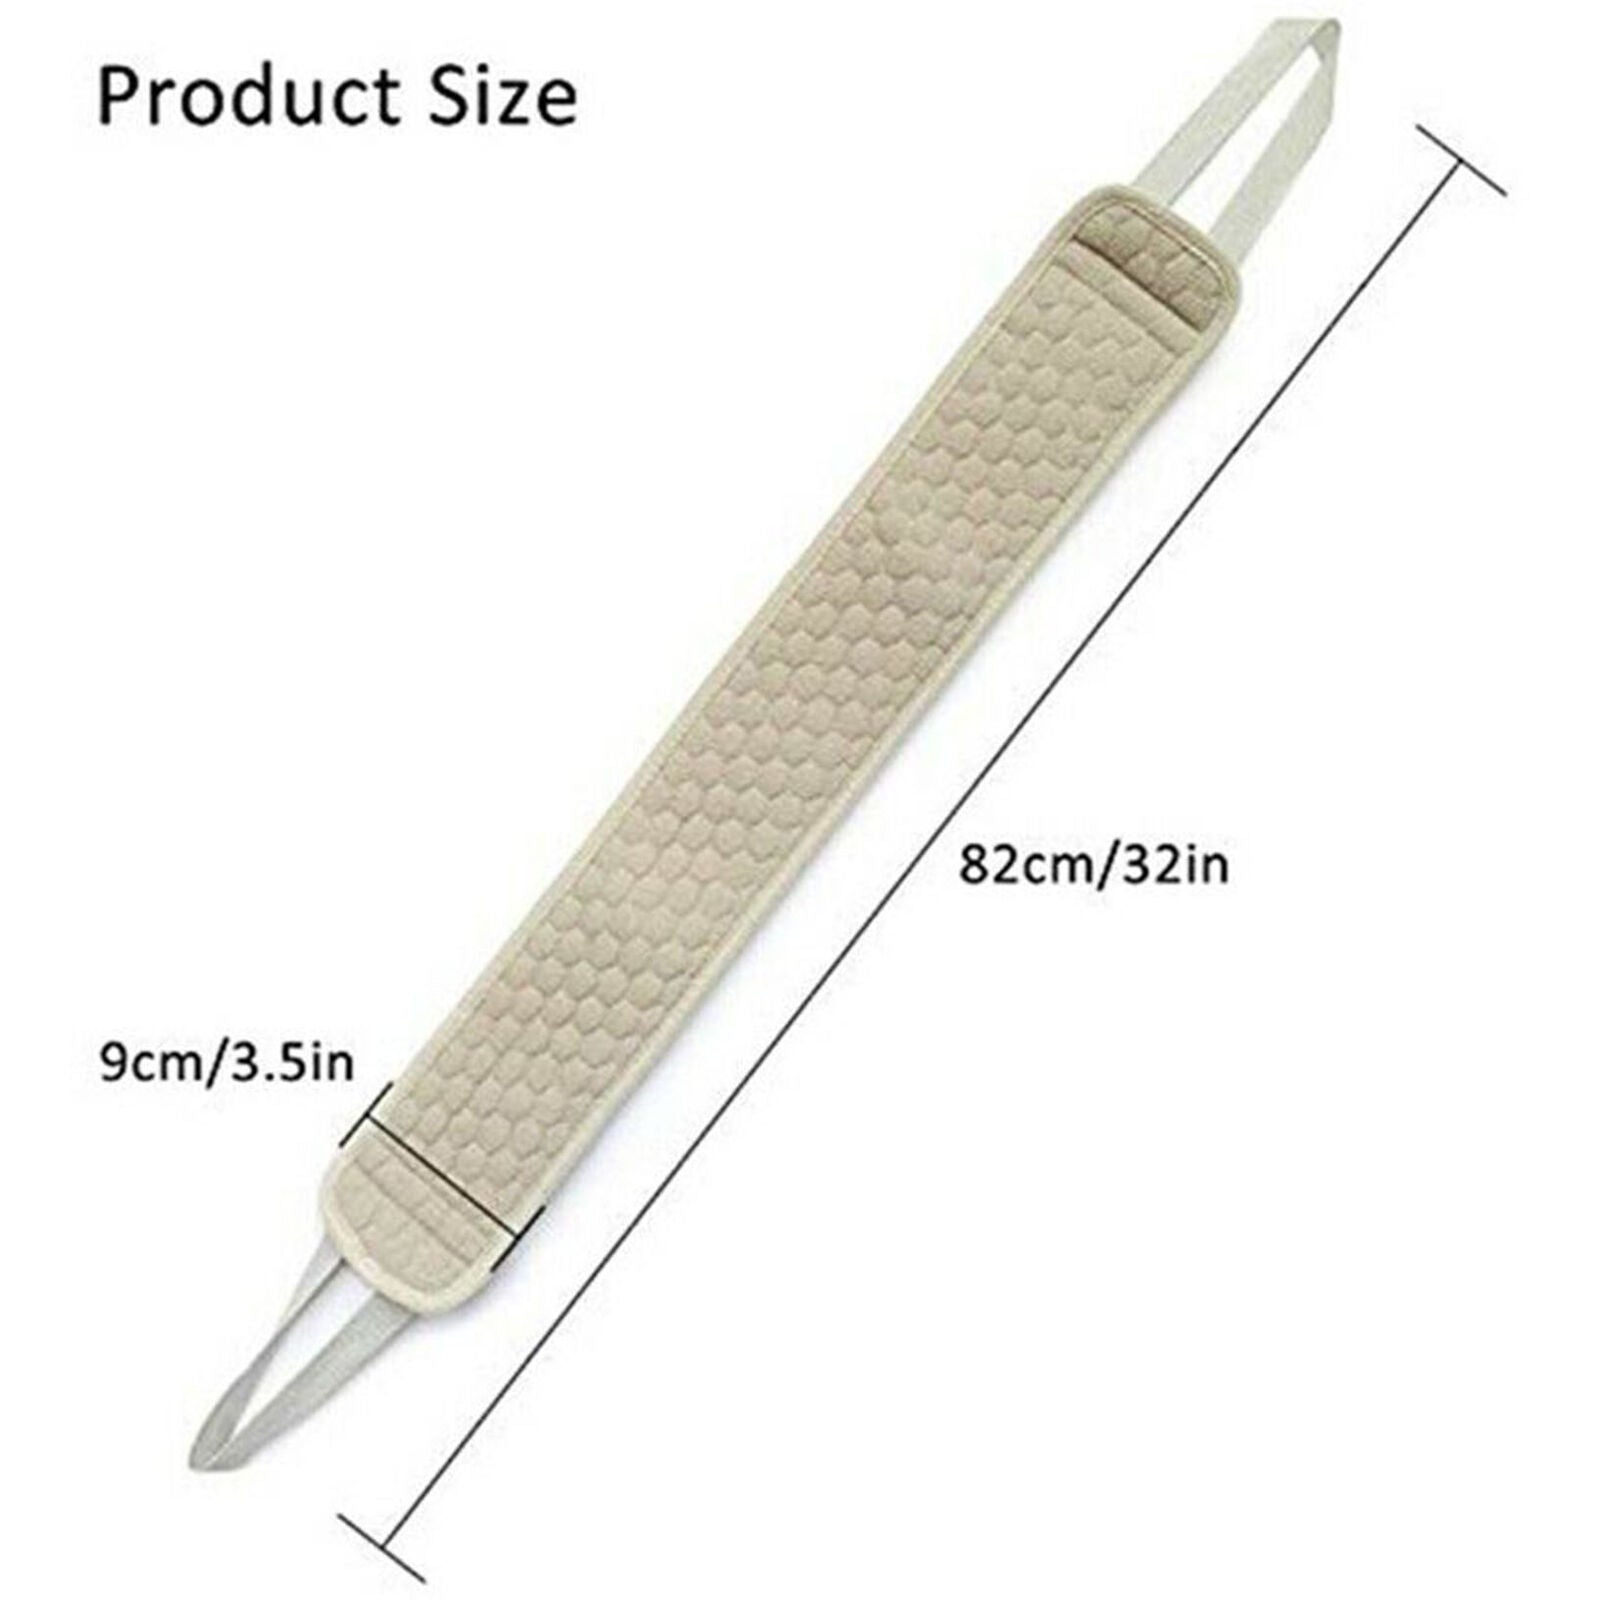 1 *Double Sided Back Strap Long Scrubber Bath Shower Spa Body Exfoliating Best